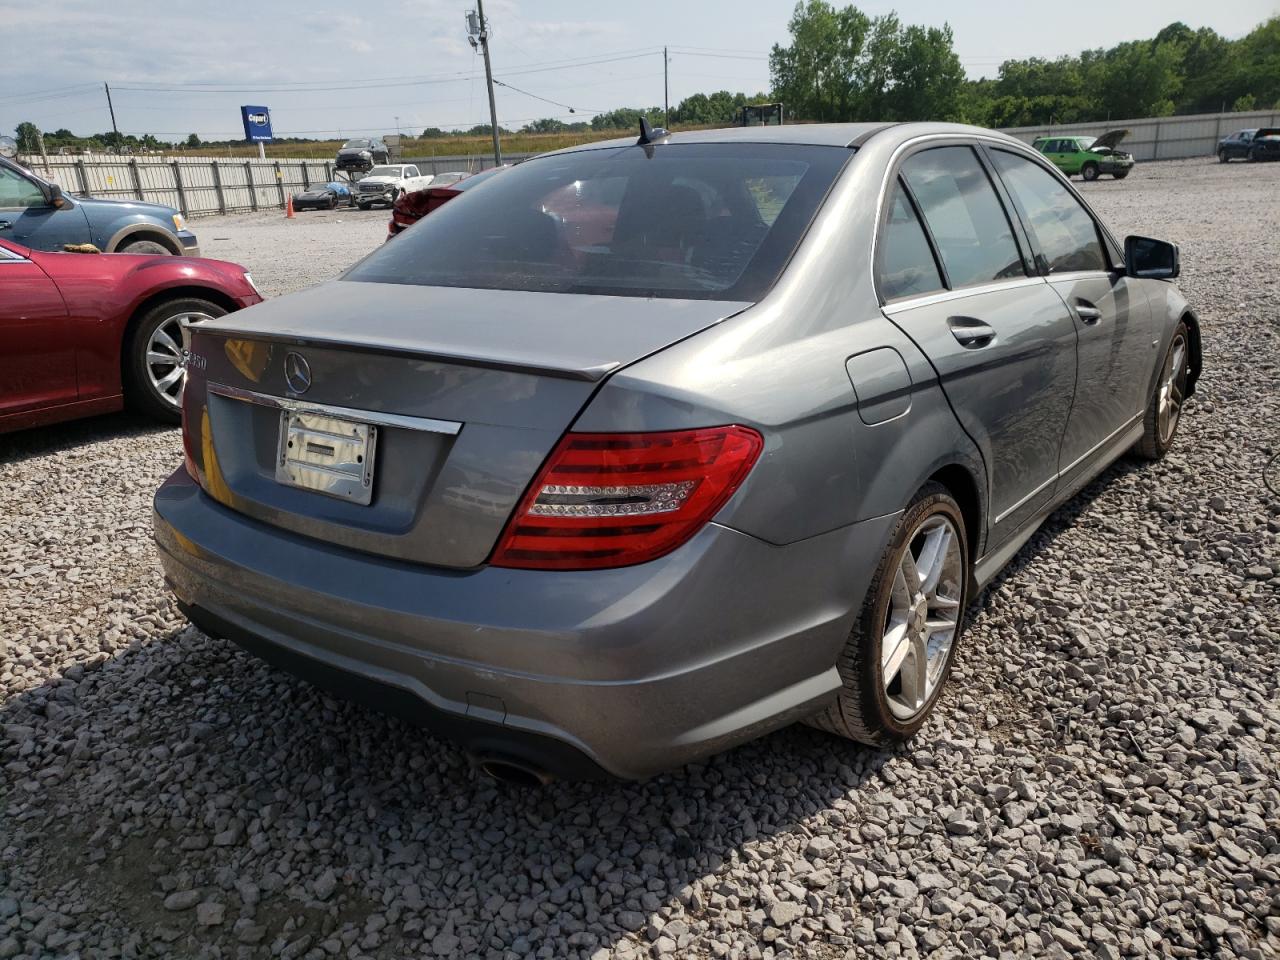 WDDGF5HB1CR****** Salvage and Wrecked 2012 Mercedes-Benz C-Class in Alabama State